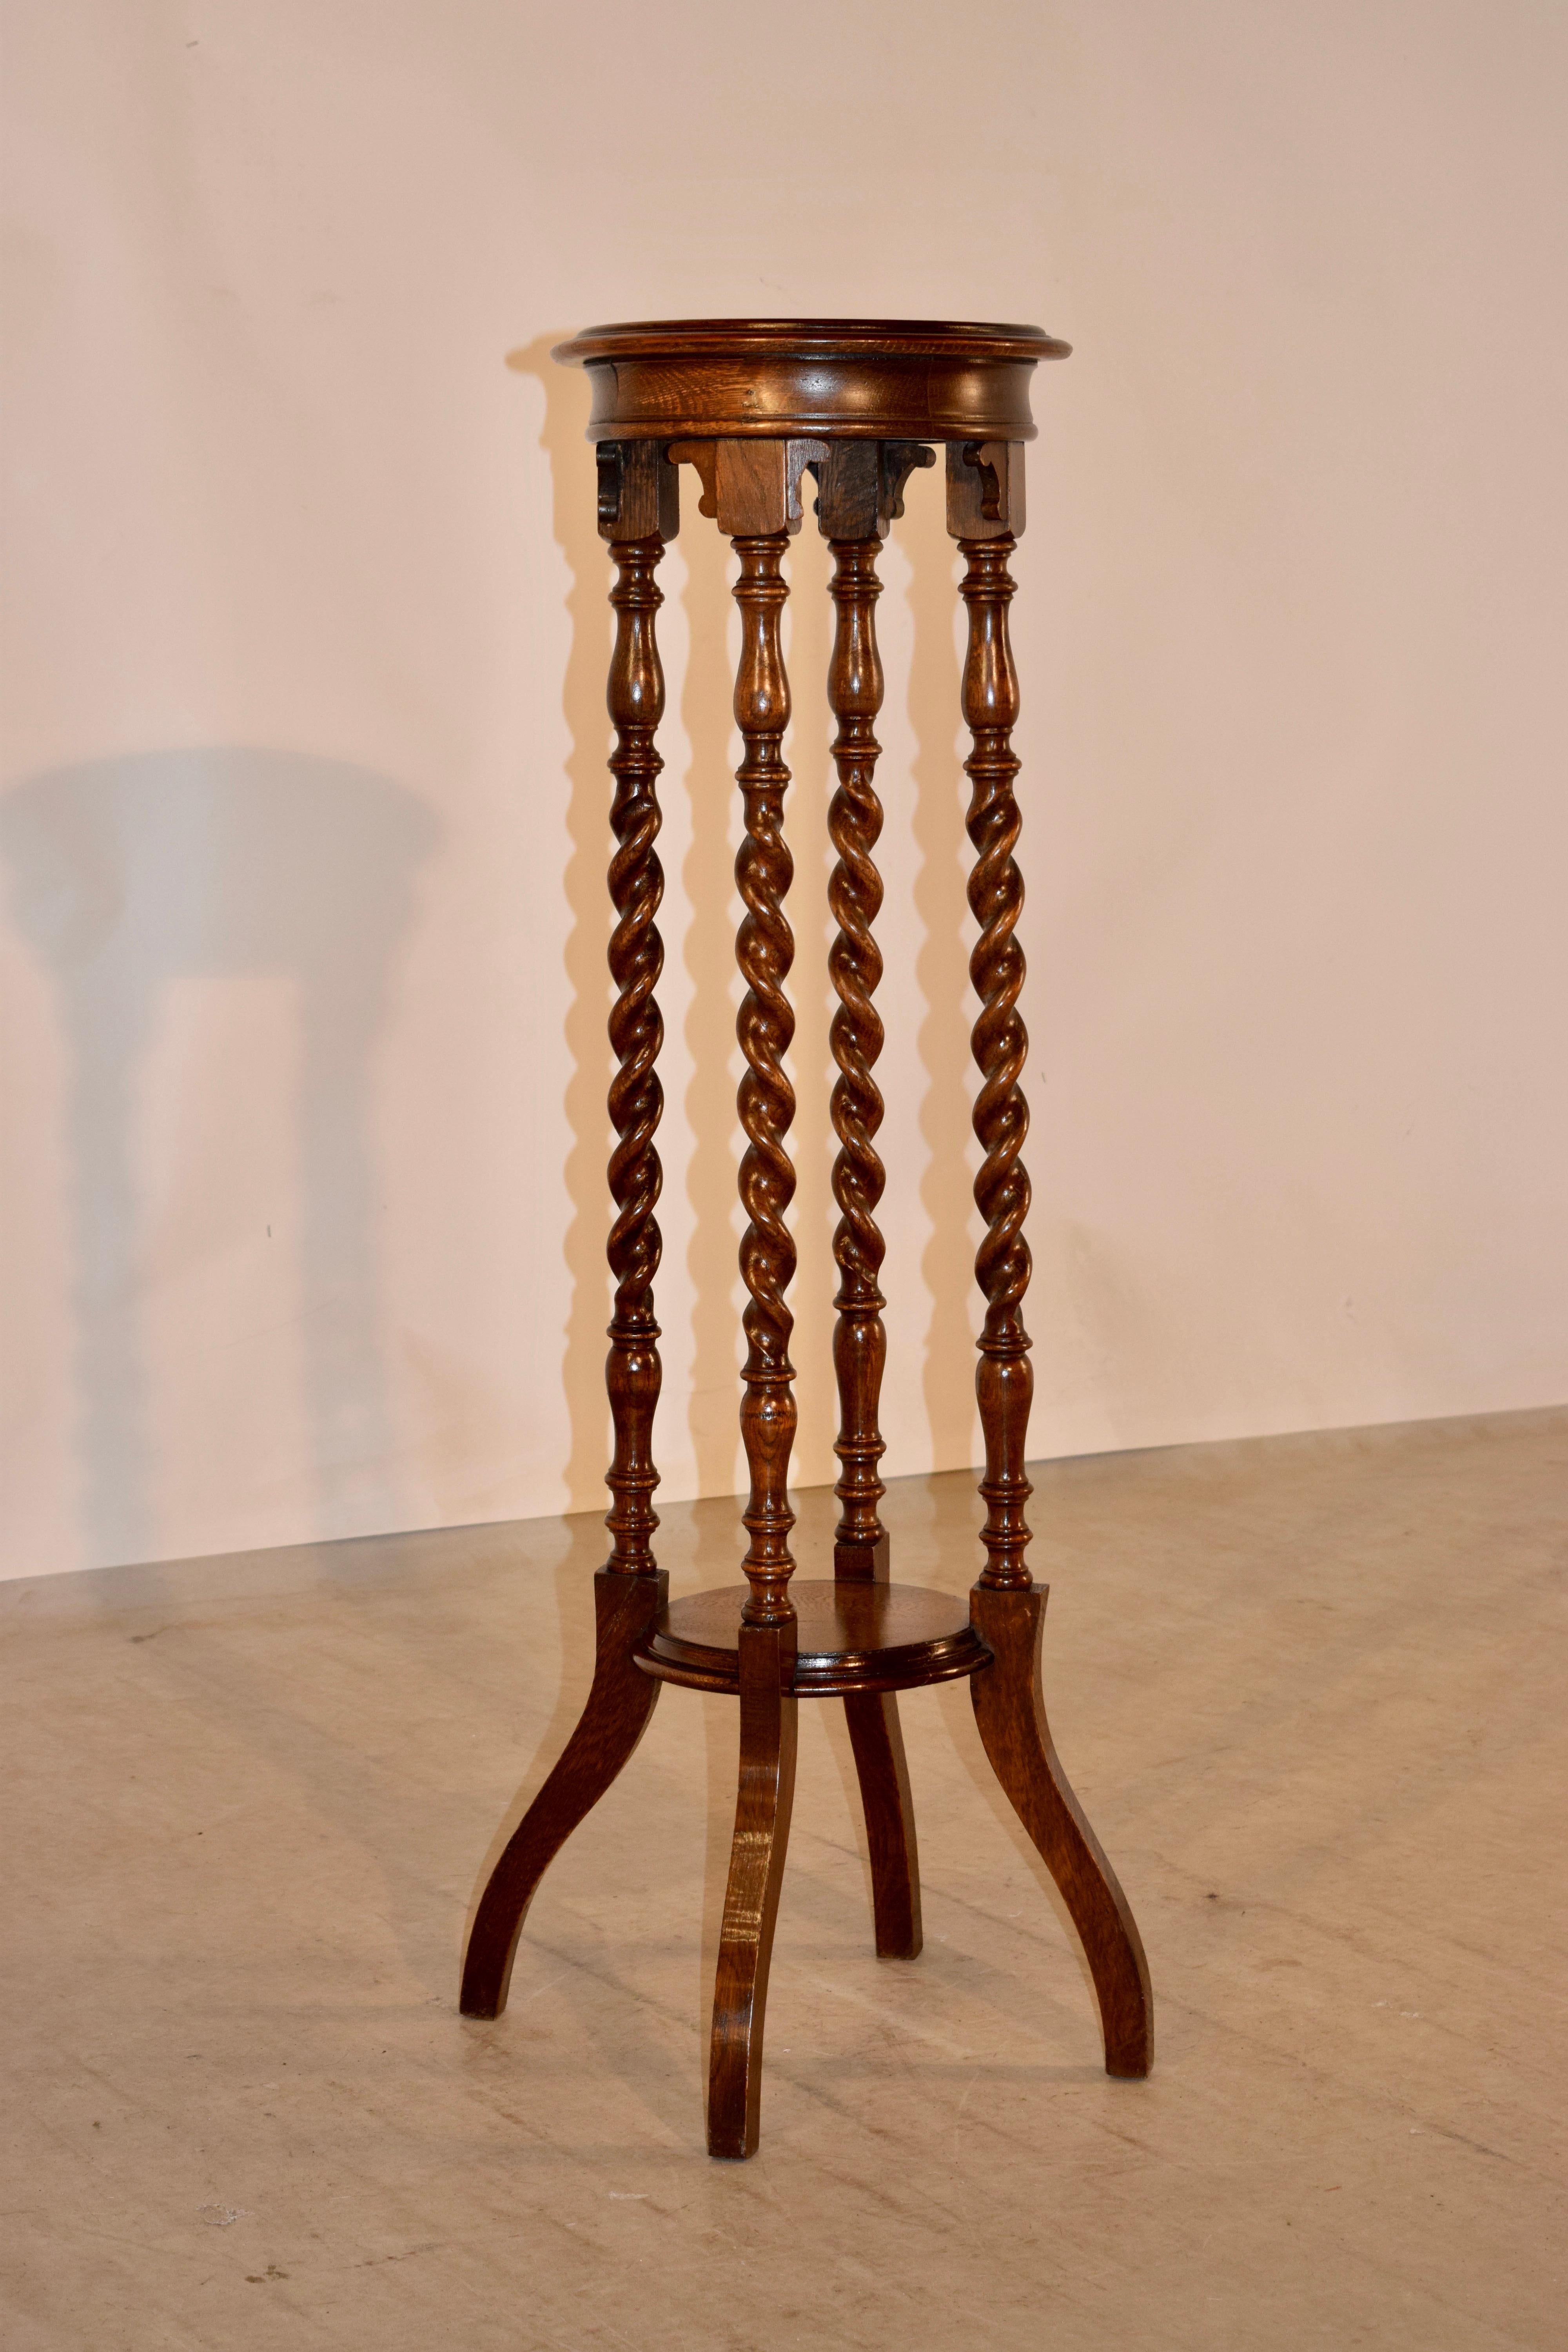 19th century oak plant stand from England with a dish shaped top which measures 10.75 inches x 9.88 inches, and is supported on hand tuned barley twist legs, ending in broadly splayed feet, joined by a lower shelf, which has a molded and beveled